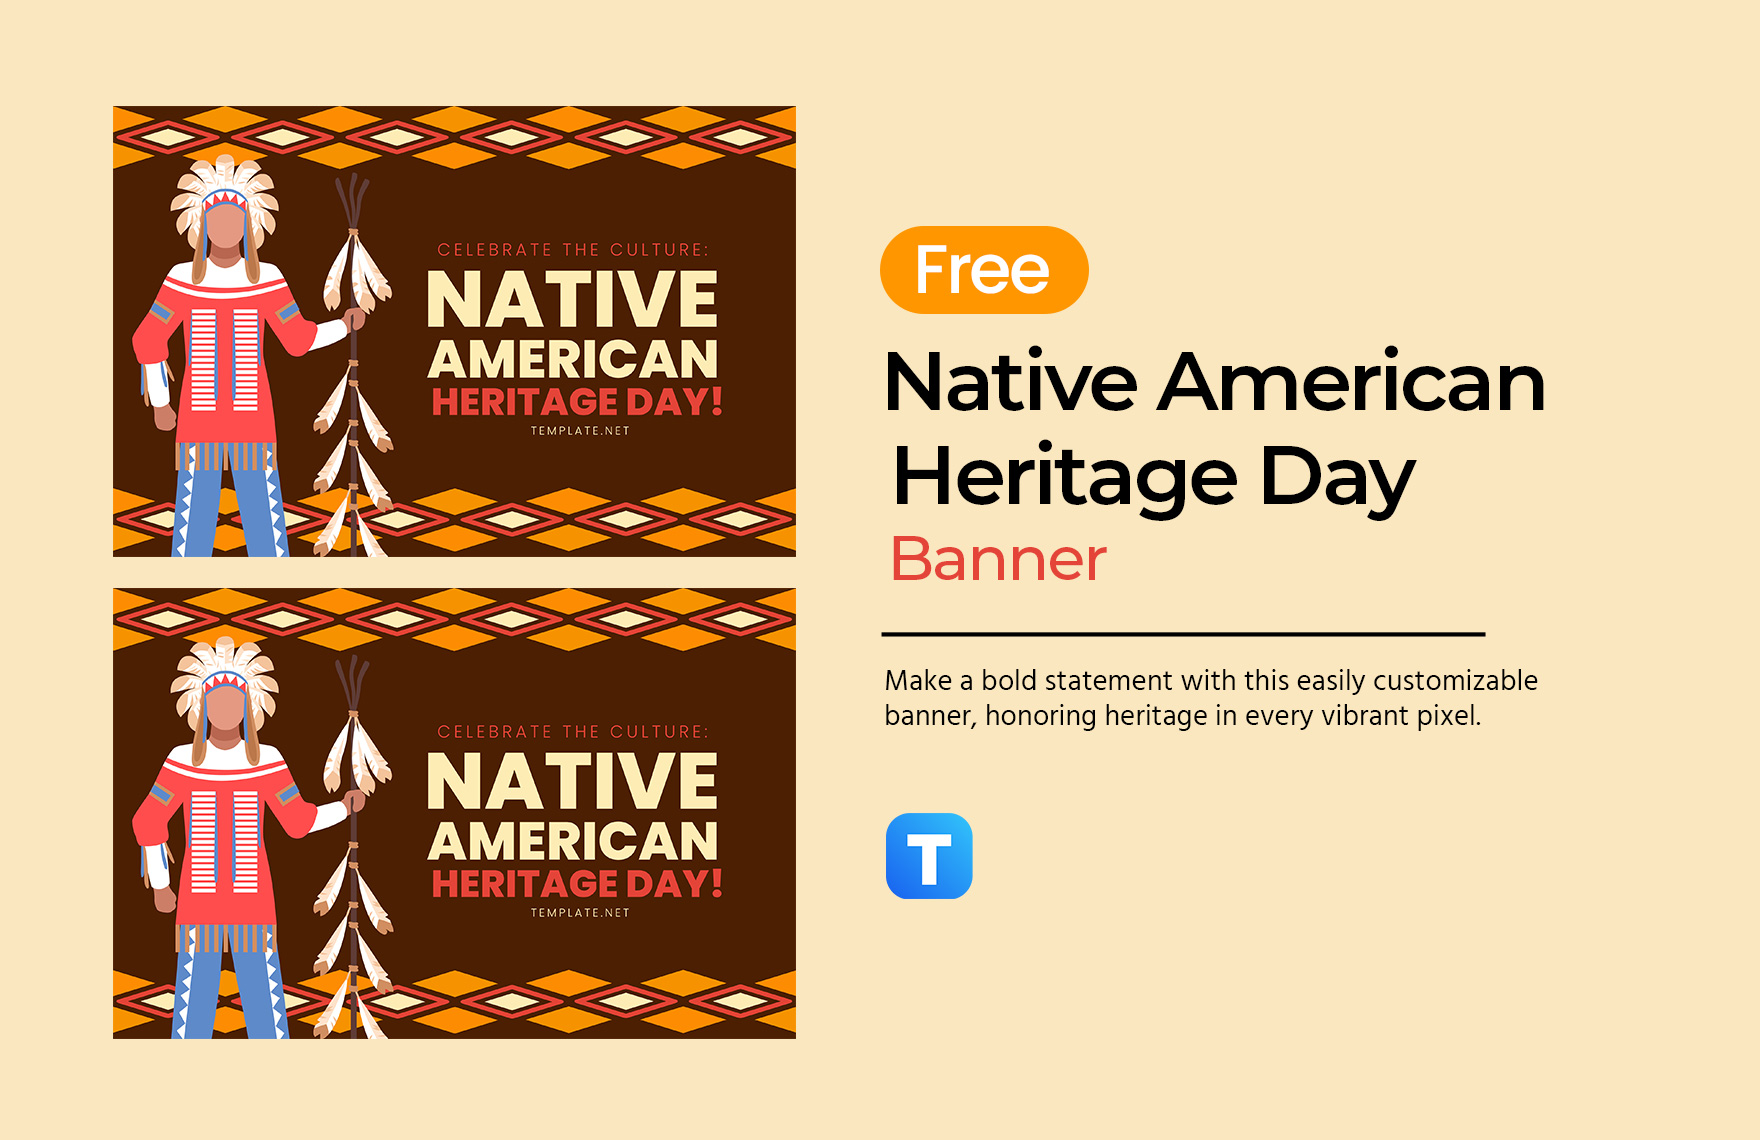 Native American Heritage Day Banner